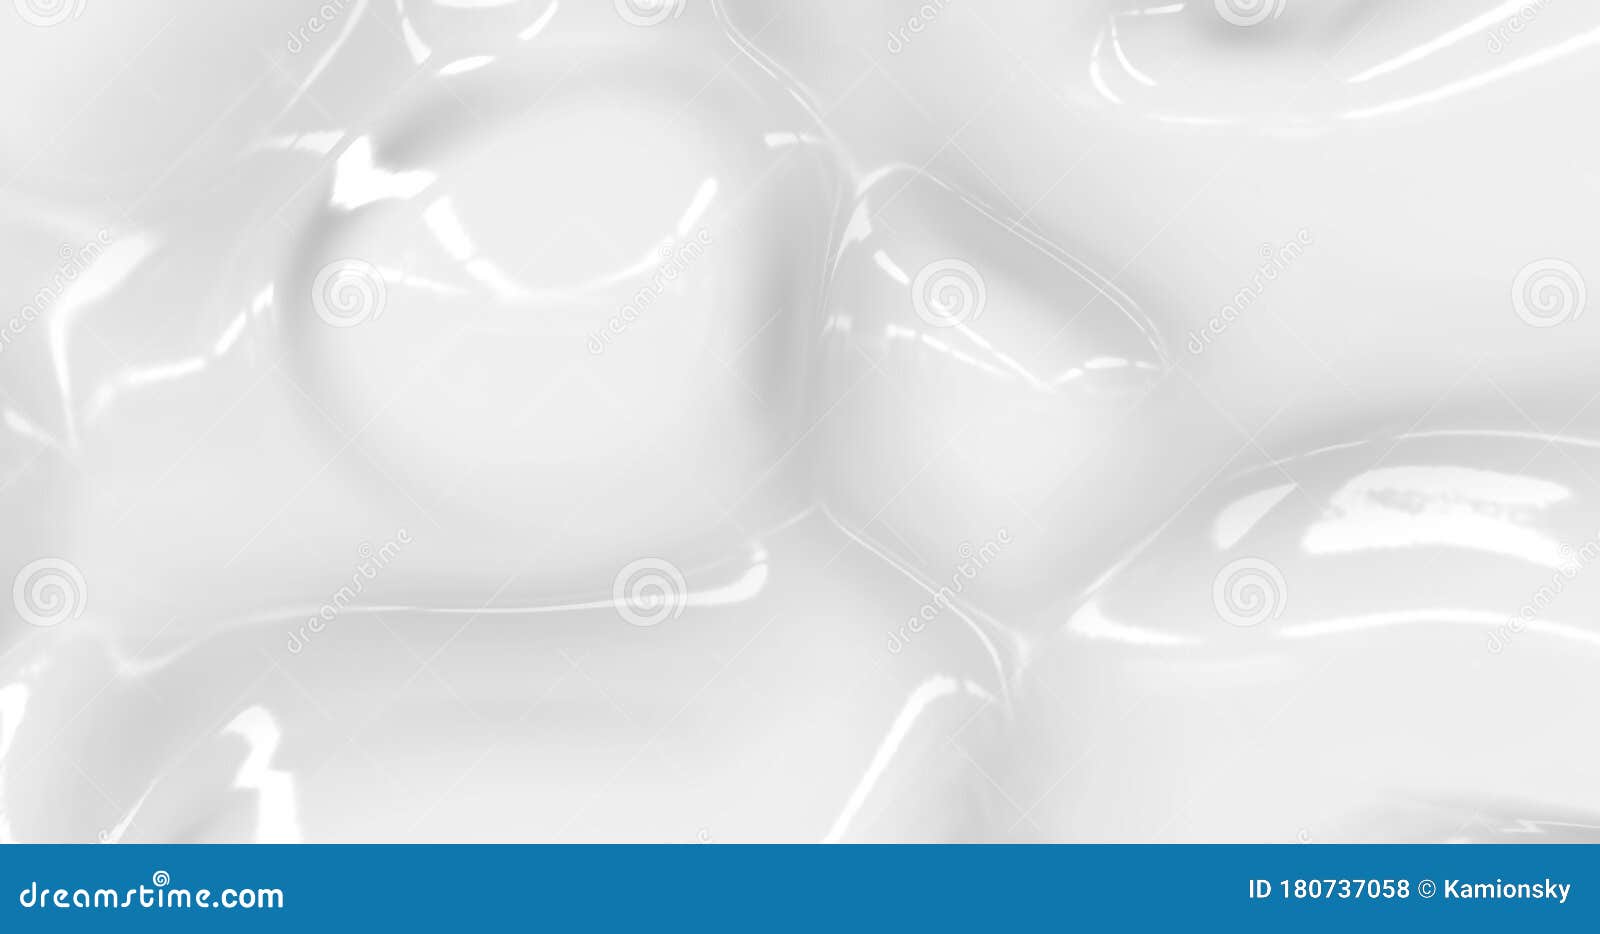 Liquid Abstract White Background. Smooth Glossy Texture 3D Rendering 3D ...